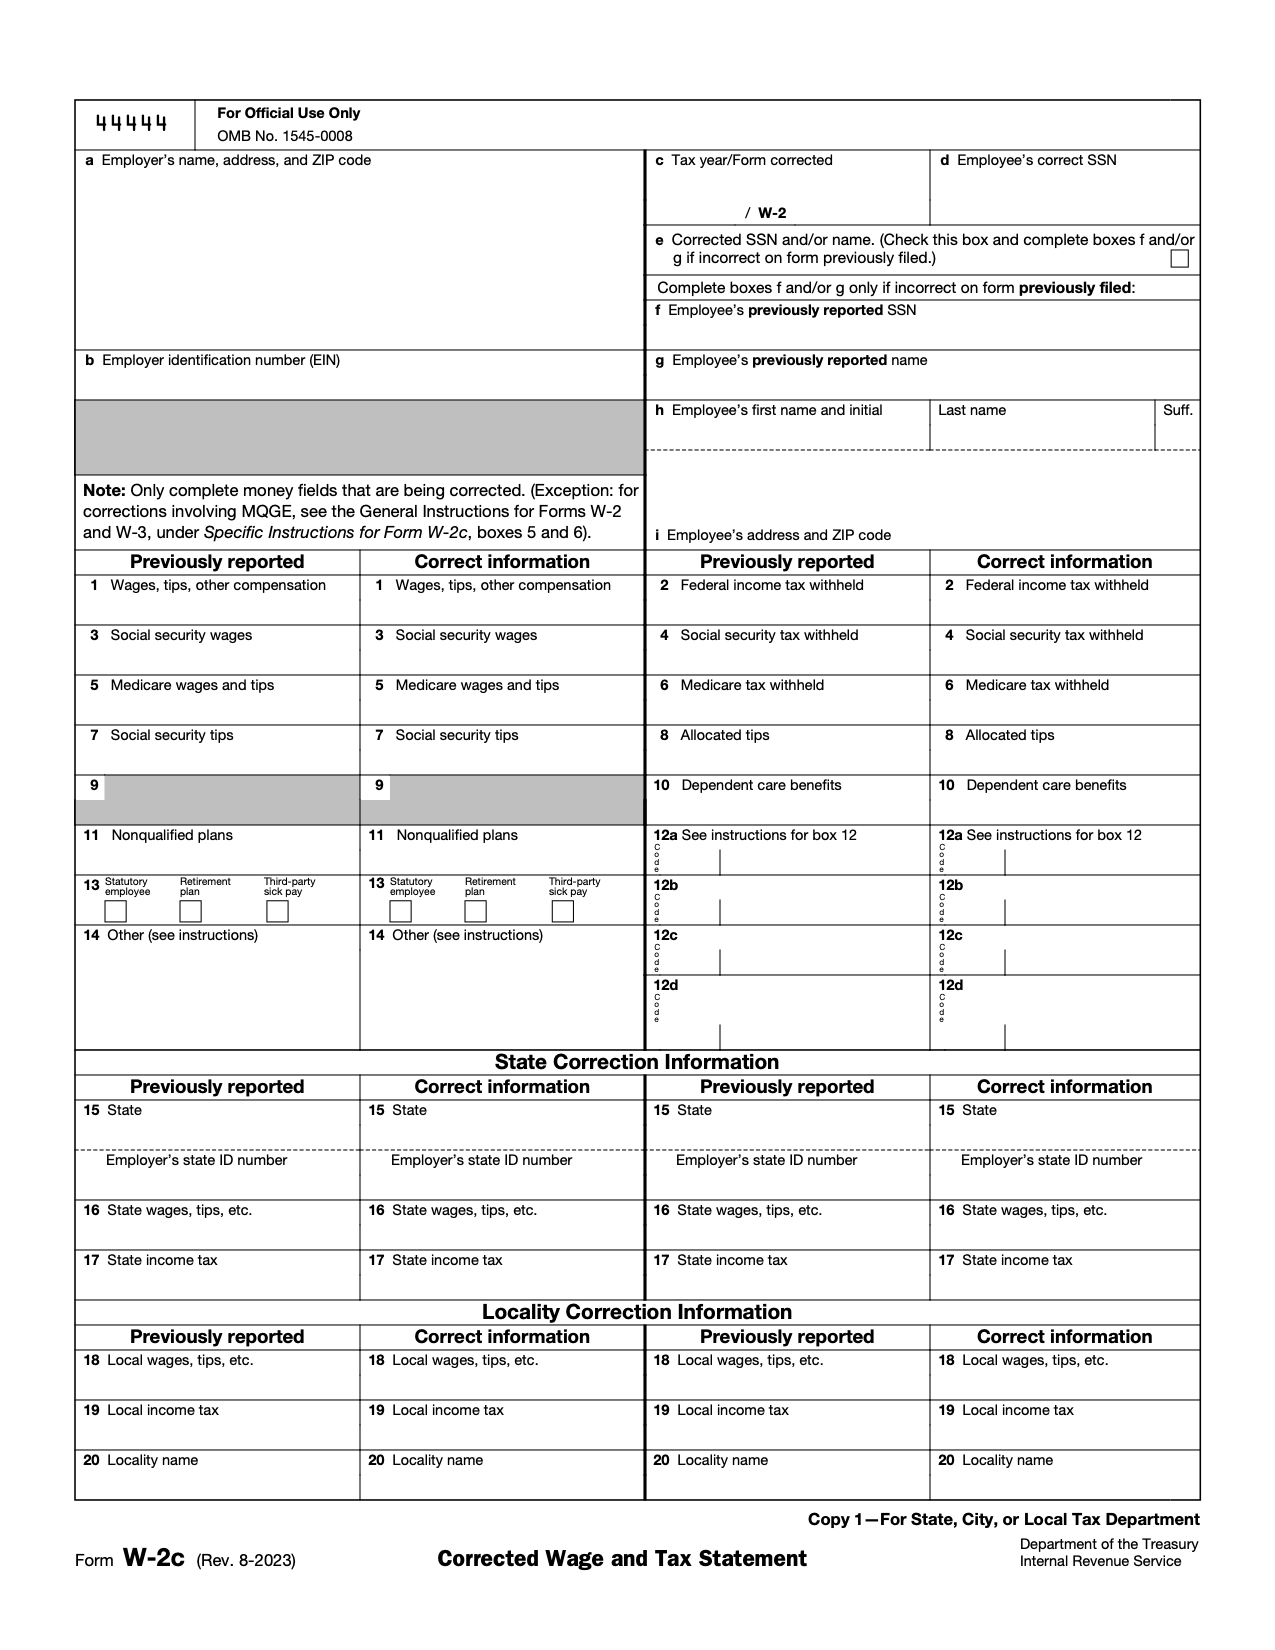 Free Irs Form W-2C | Corrected Wage And Tax Statement - Pdf – Eforms regarding How To Correct W2 Form